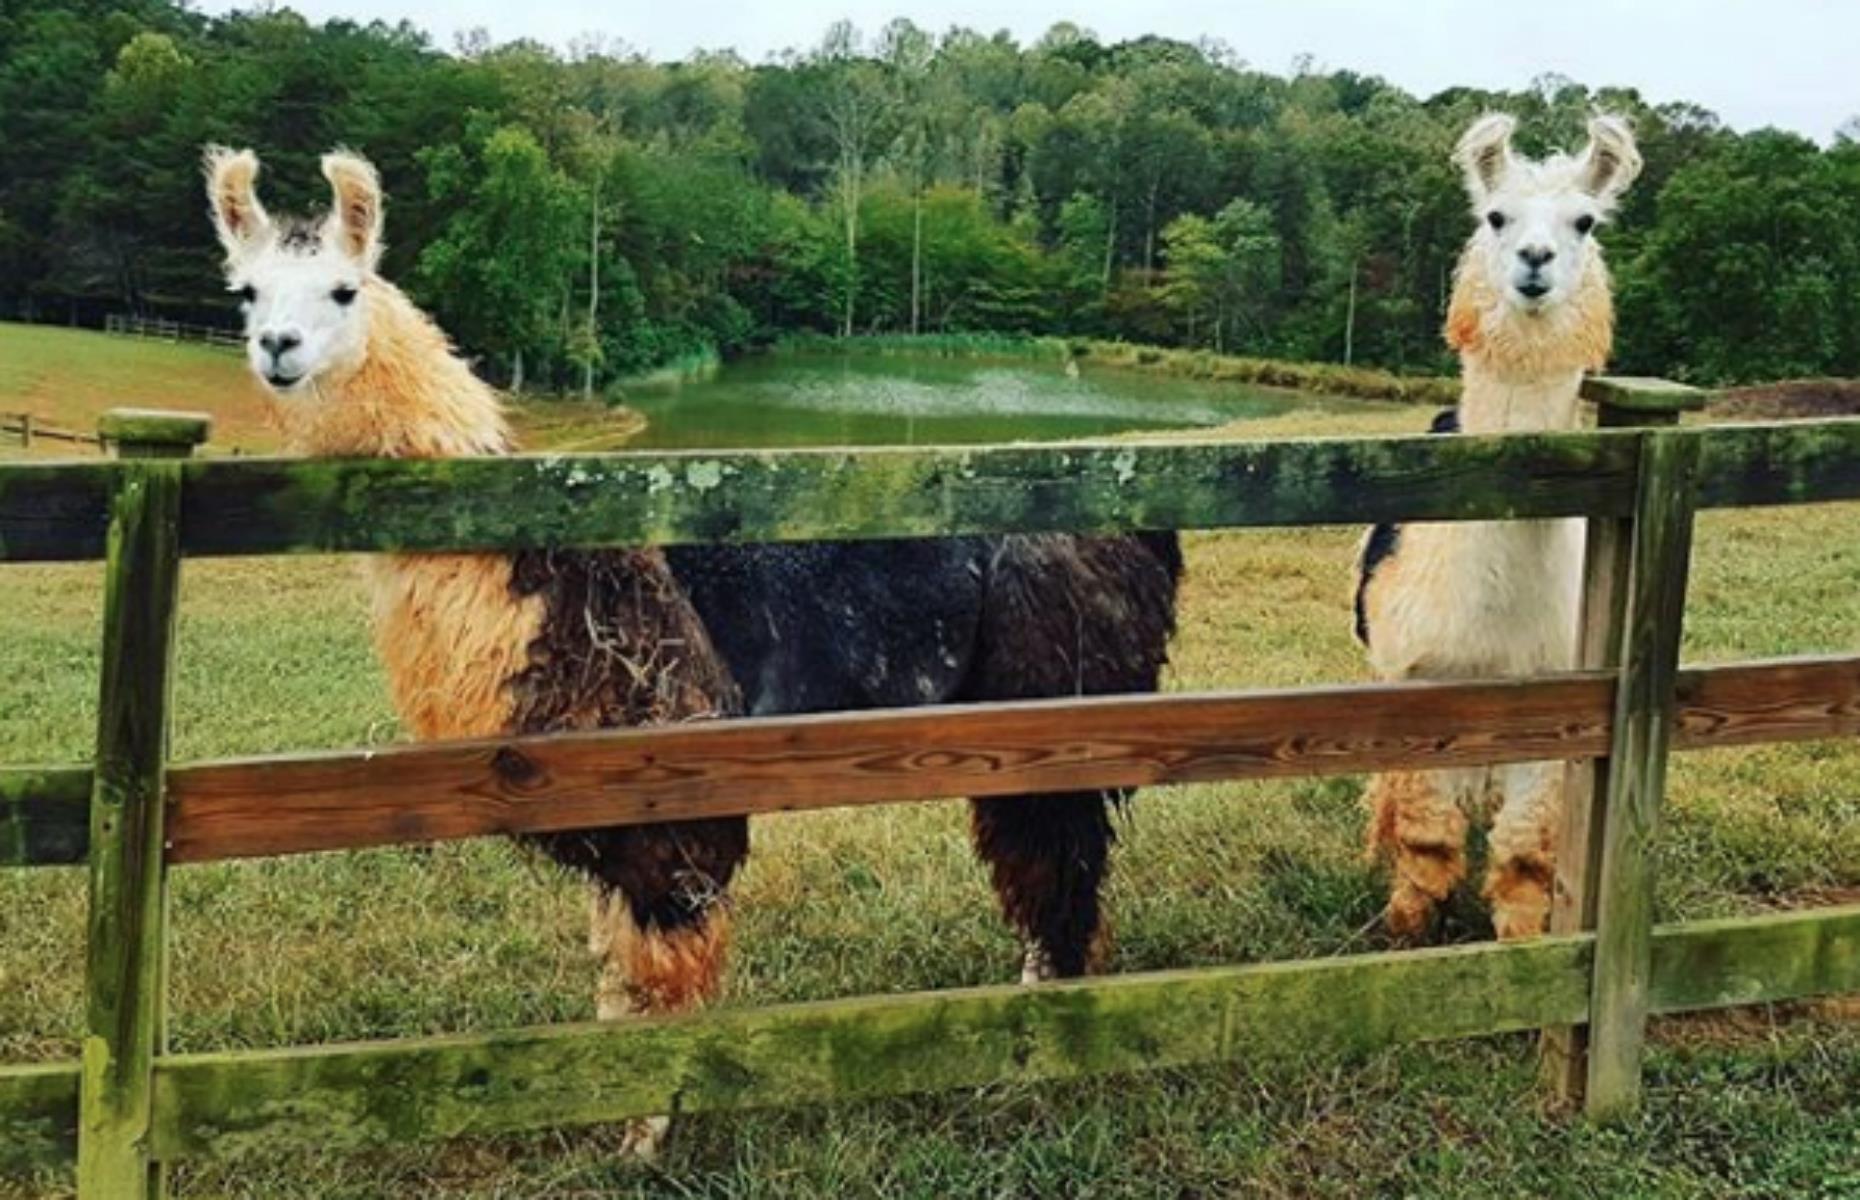 <p>Animal lovers look no further: we’ve got the perfect wine tasting experience for you. At <a href="https://www.divinellamavineyards.com/">Divine Llama Vineyards</a> in North Carolina’s Yadkin Valley, you’ll get to sample a range of delicious wines, from a sunny rosé to a tobacco-tinged red blend, in the company of some 60 of these woolly-haired creatures. Fancy going all out? Book in advance to trek with the llamas, ending with a bottle of something back at the tasting room (note that treks are not offered in summer). </p>